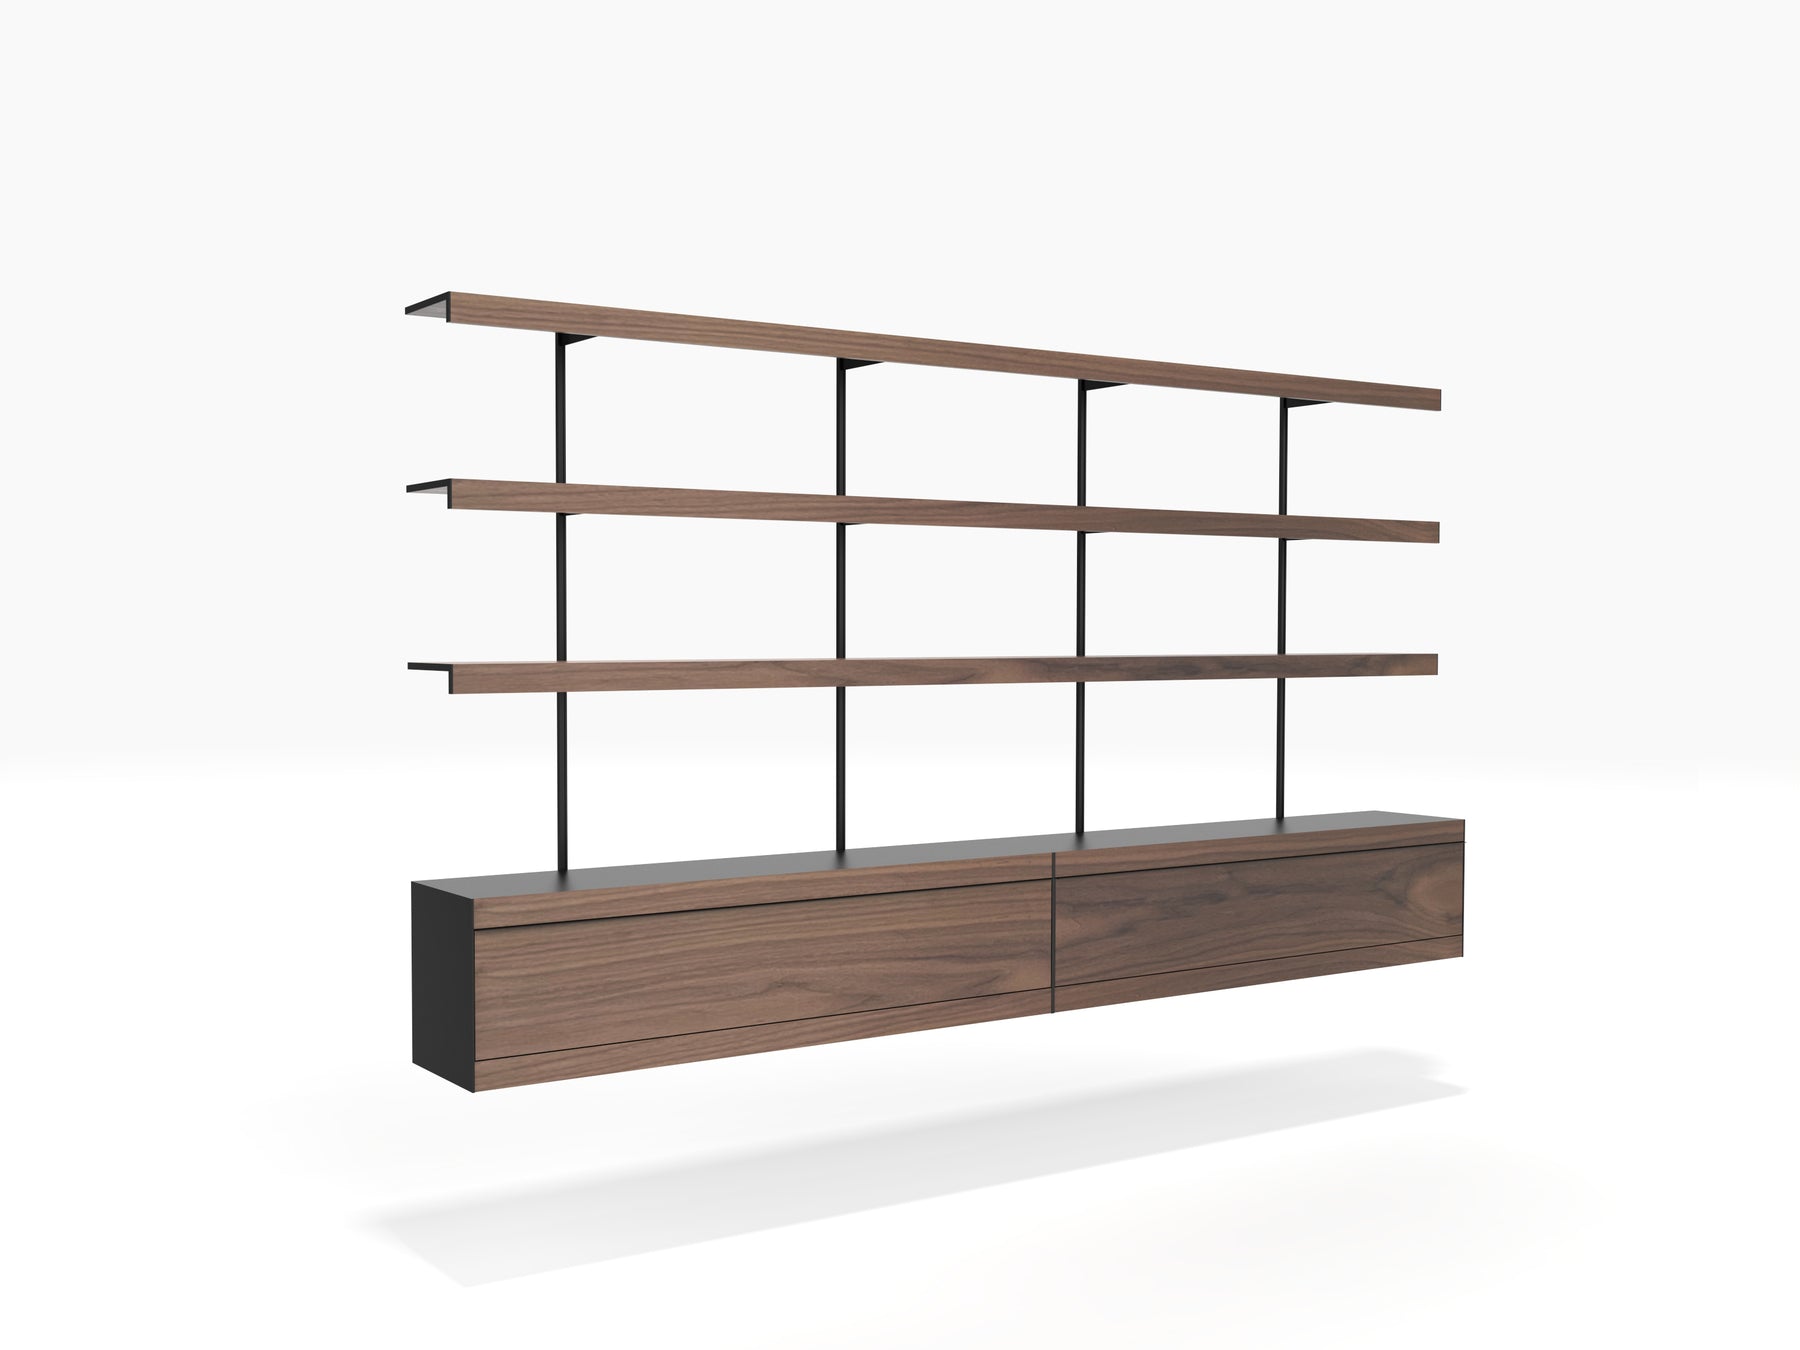 Modular wall mounted shelving system with cabinets in black & walnut